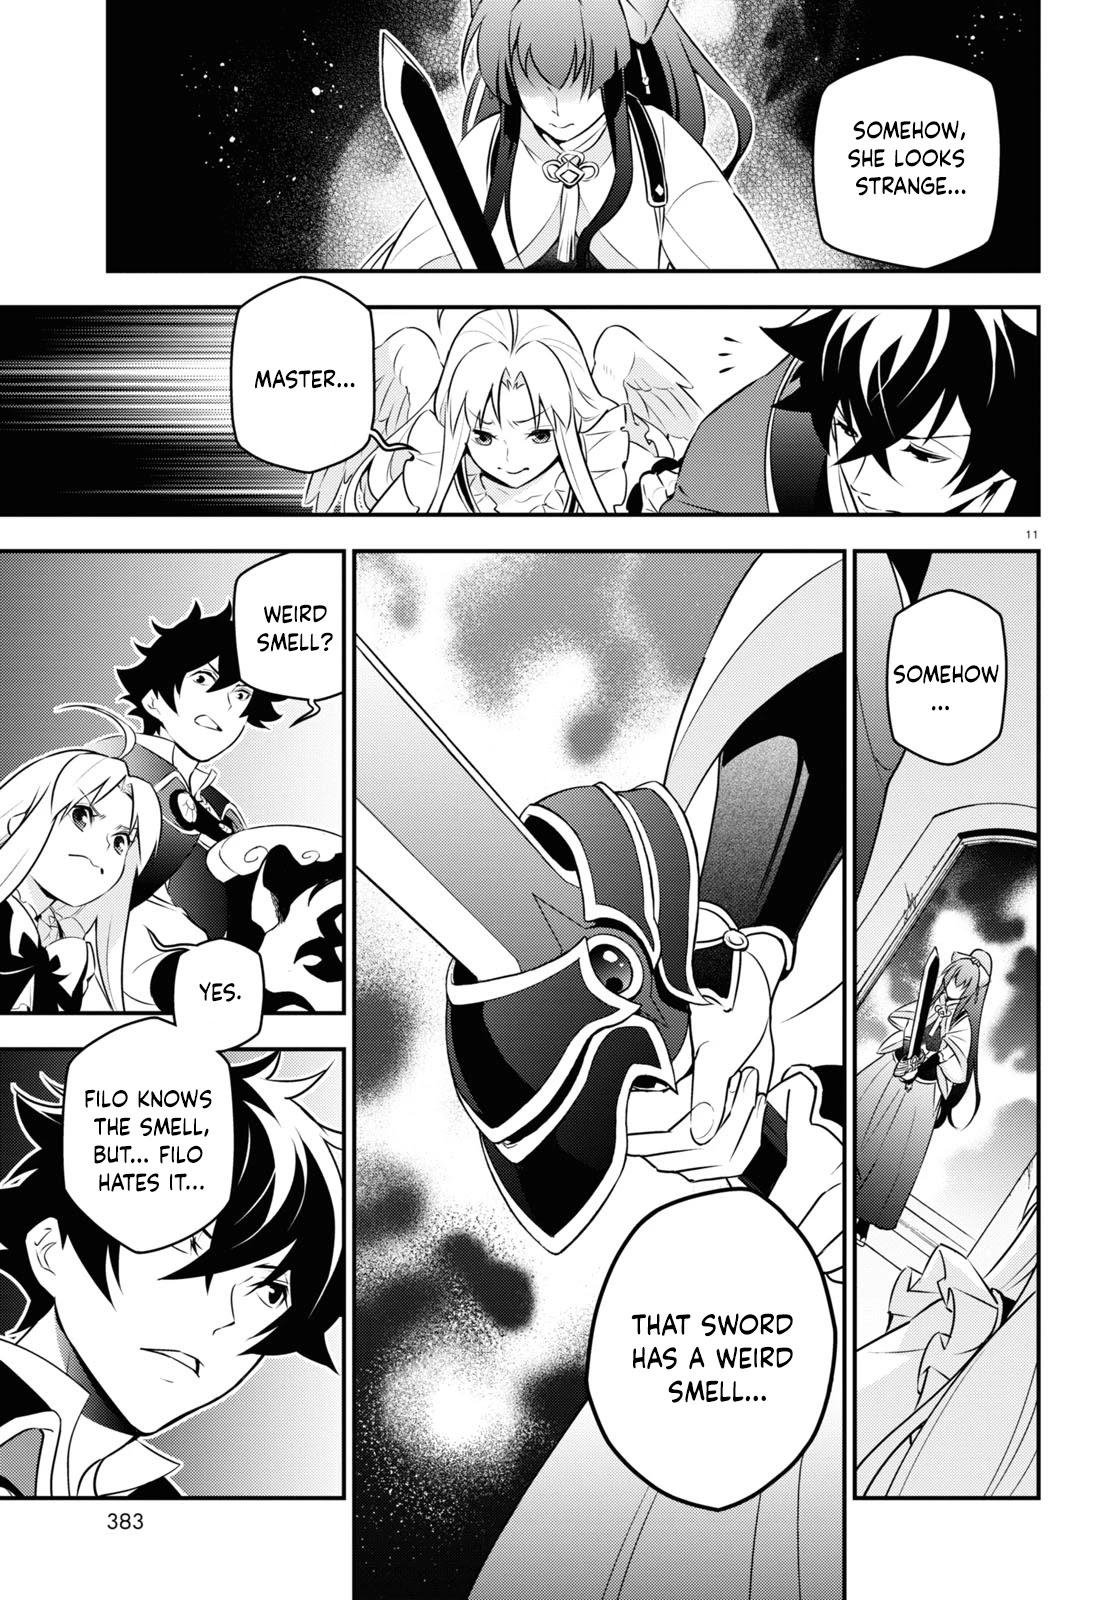 The Rising Of The Shield Hero Chapter 78: An Attacker That Charges Like A Boar page 11 - Mangakakalot